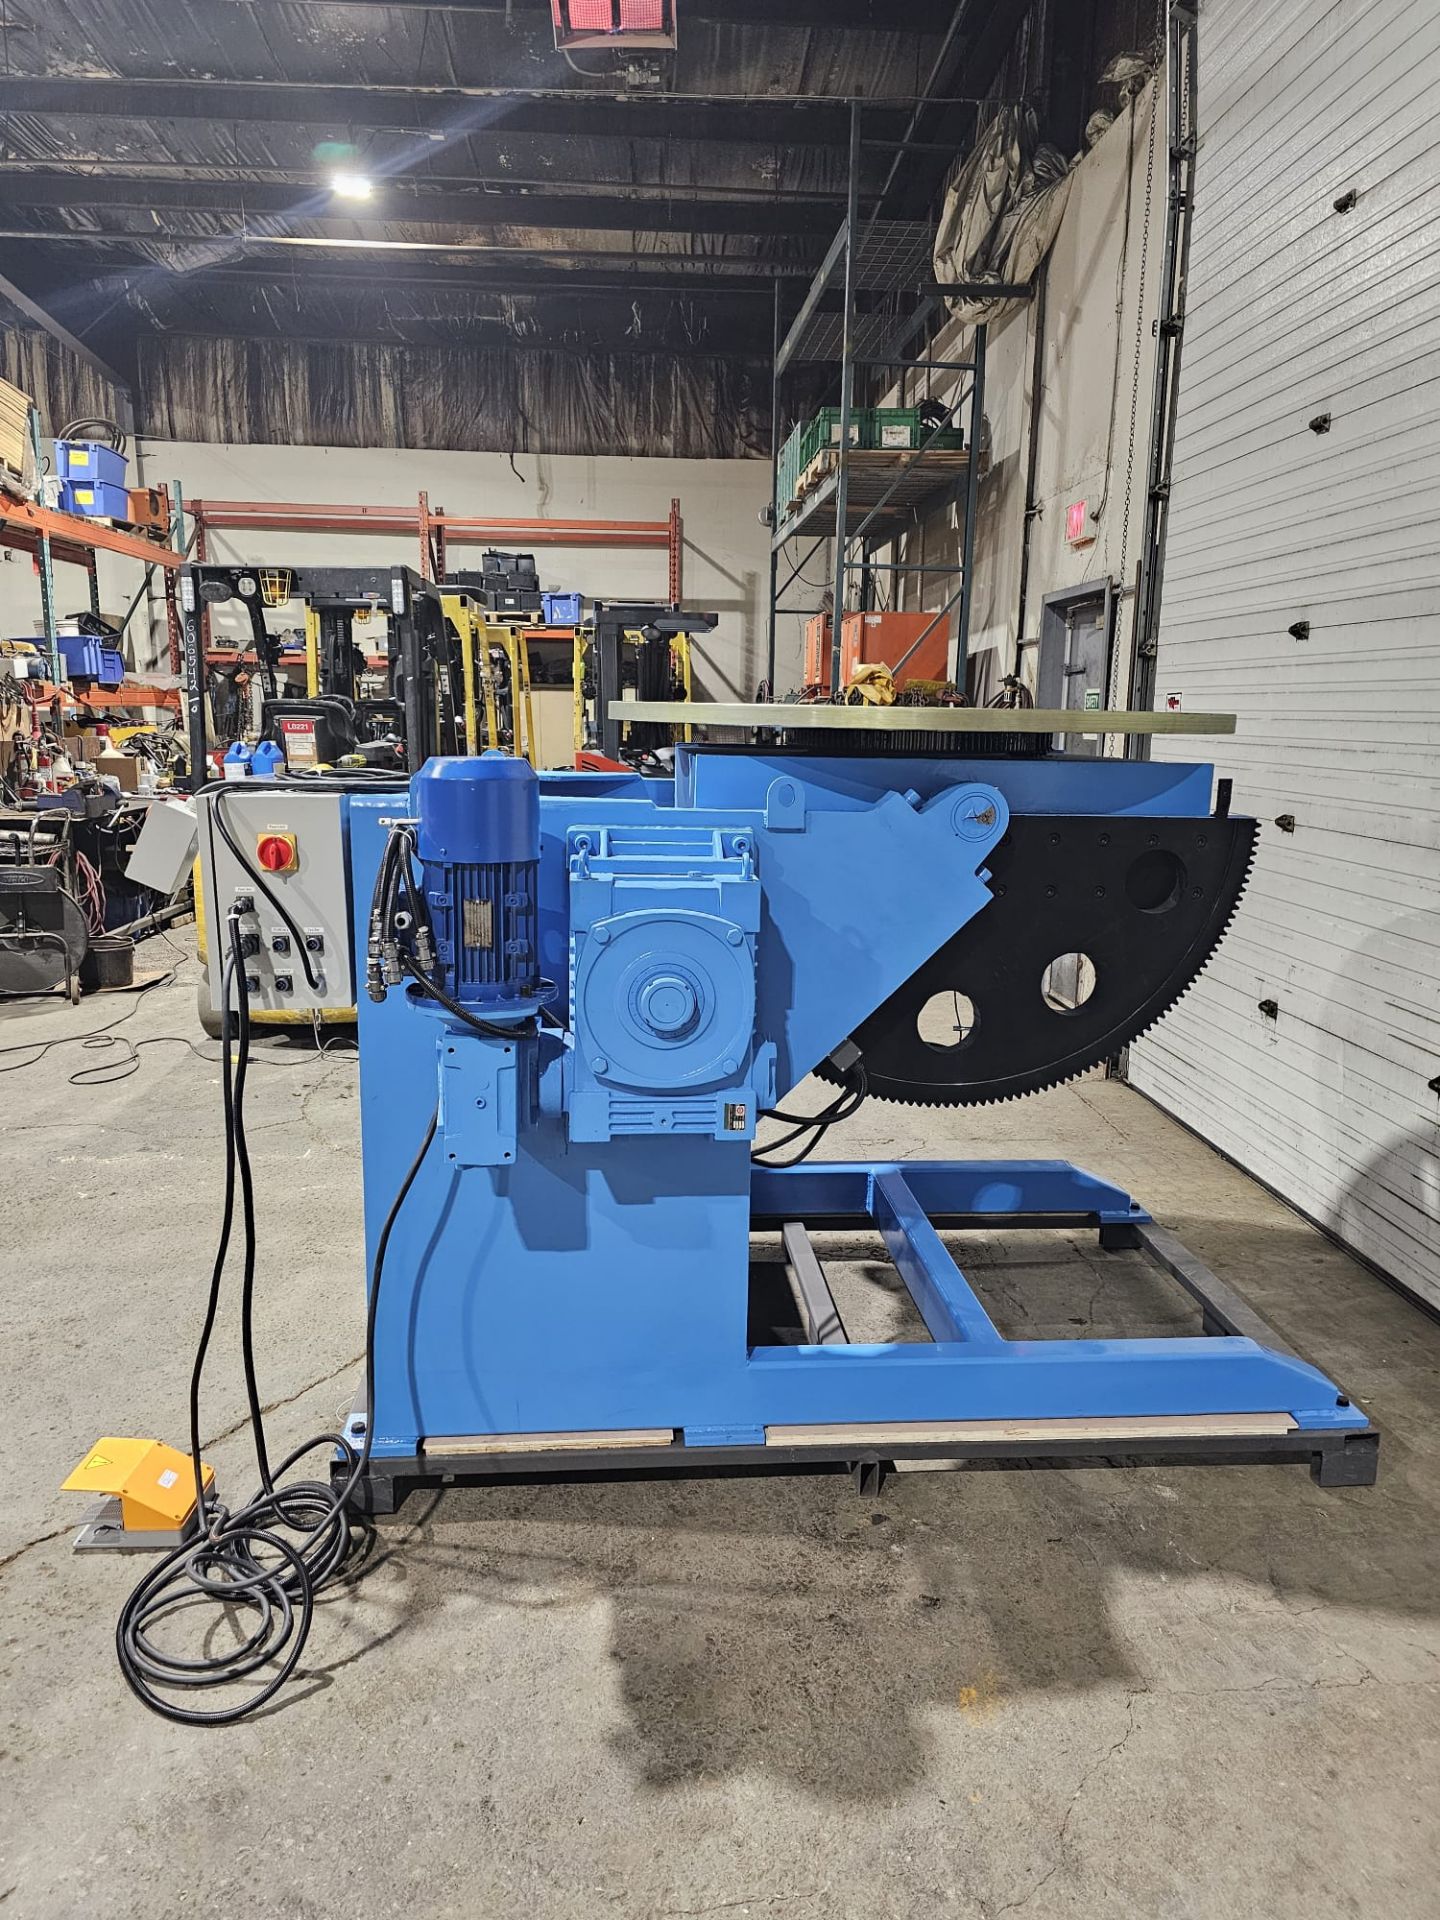 Verner model VD-8000 WELDING POSITIONER 8000lbs capacity - tilt and rotate with variable speed drive - Image 2 of 9